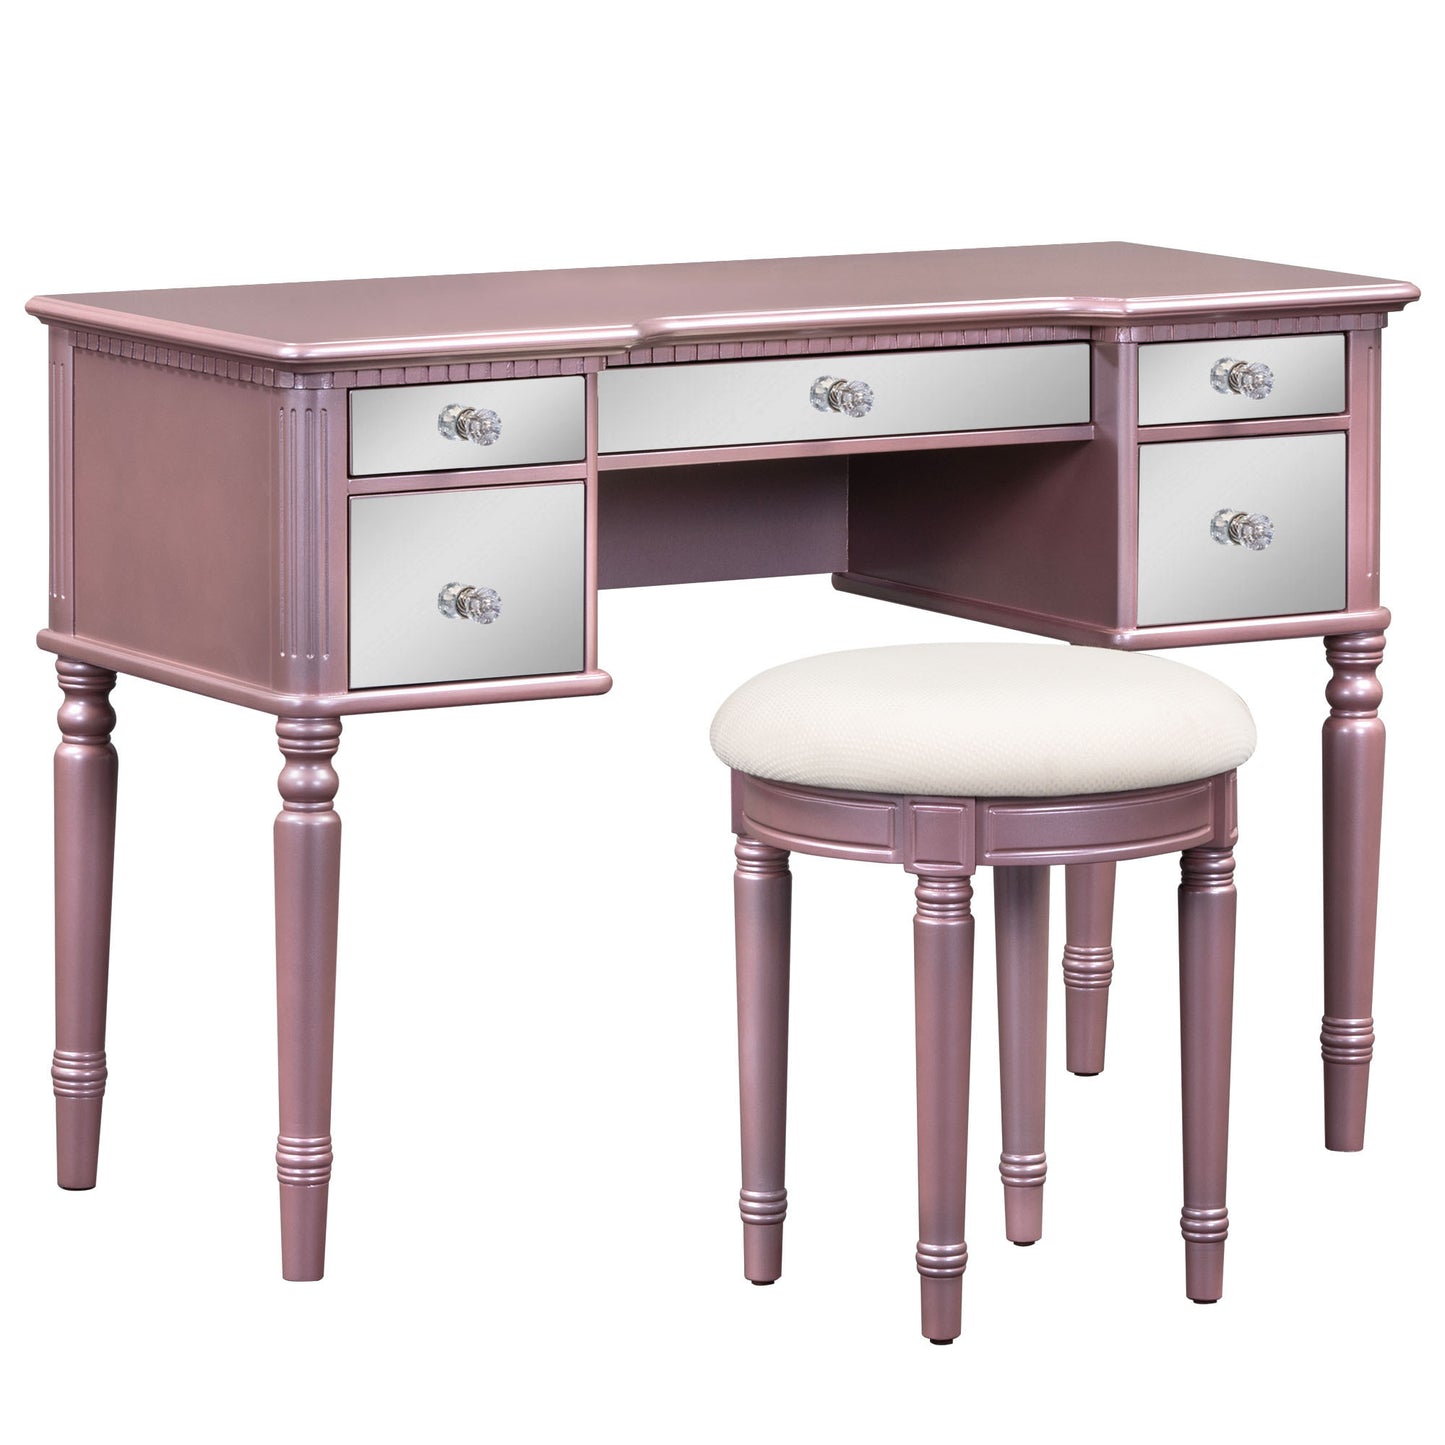 GO 43" Dressing Table Set with Mirrored Drawers and Stool, Tri-fold Mirror, Makeup Vanity Set for Bedroom, Rose Gold